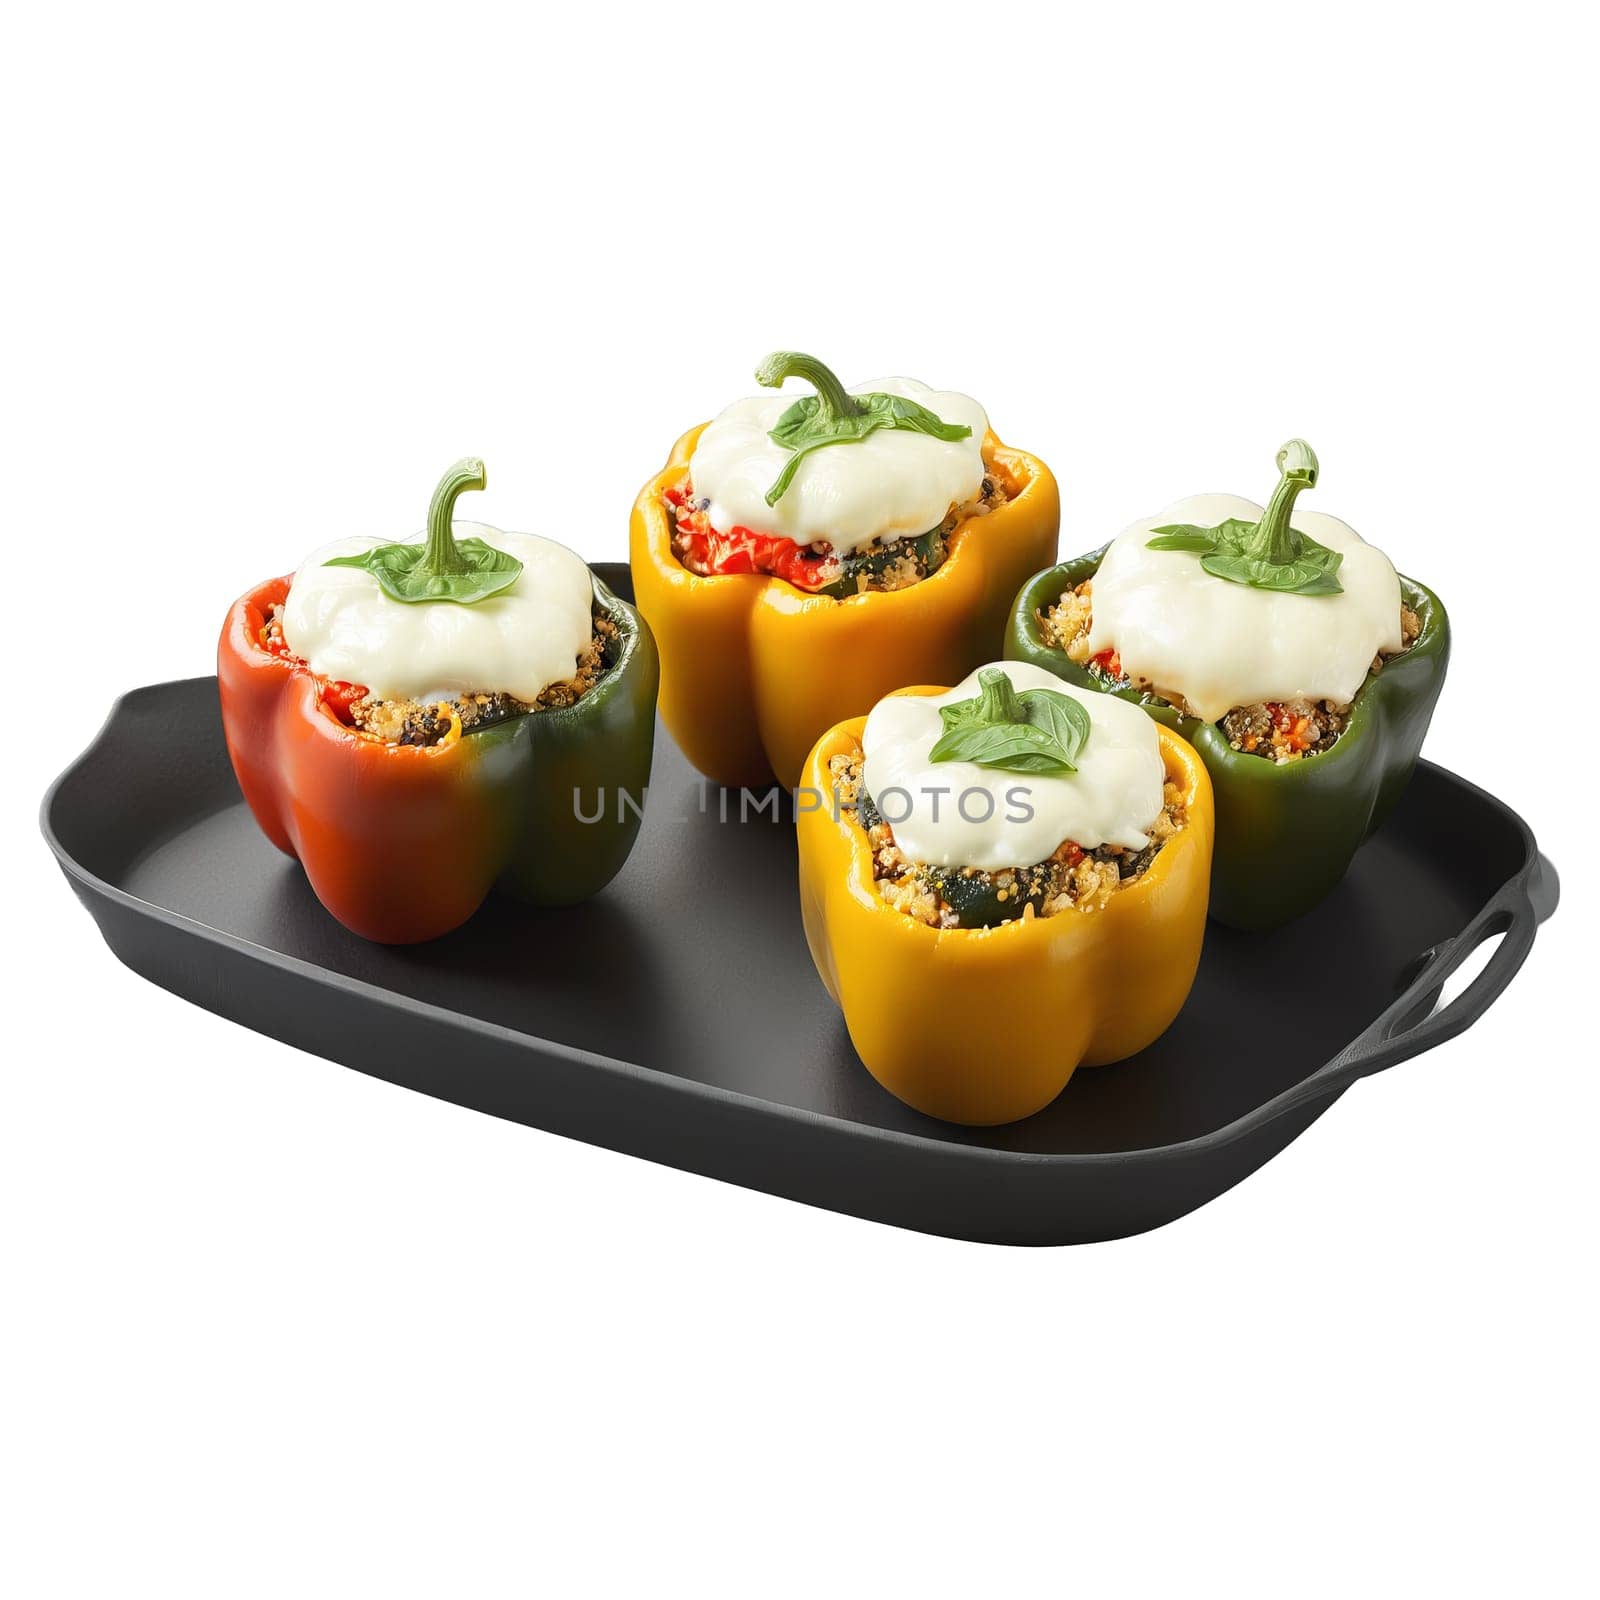 Grilled vegetable and quinoa stuffed bell peppers with melted mozzarella cheese on top Summer food by panophotograph